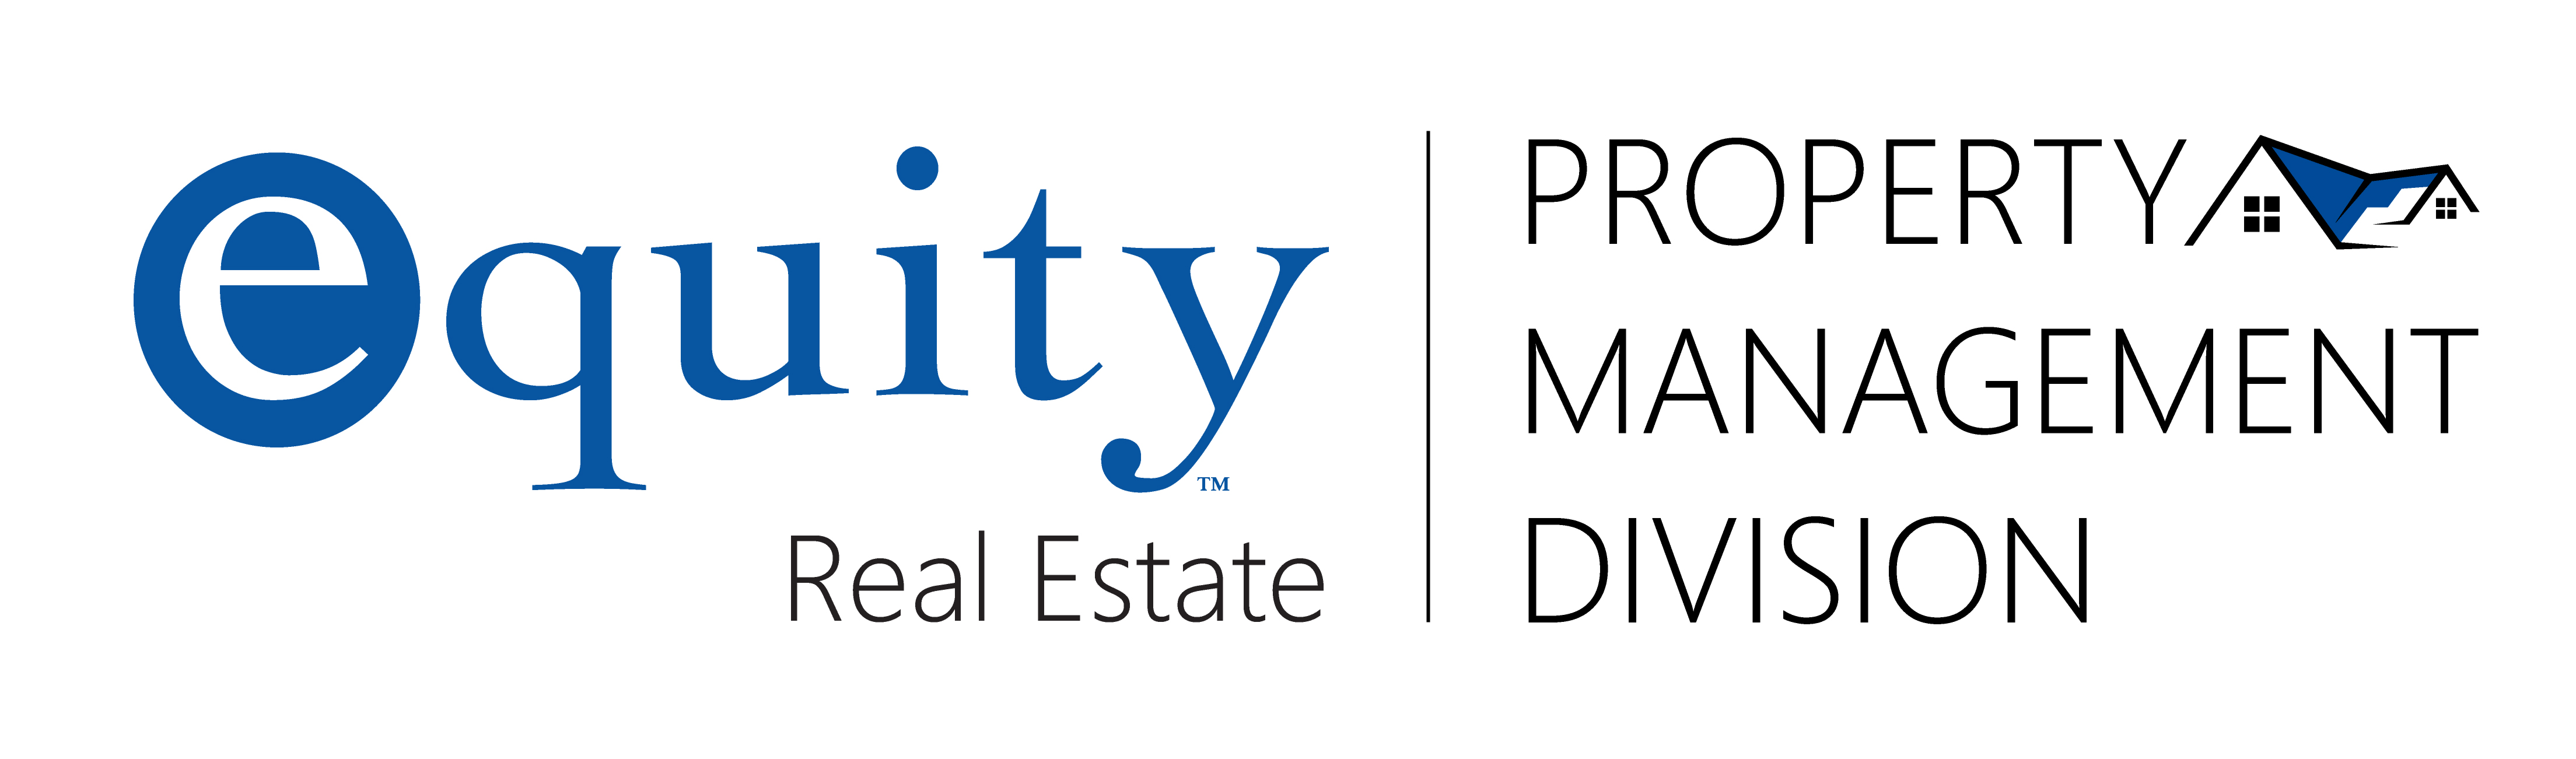 Equity Real Estate -Property Management Division